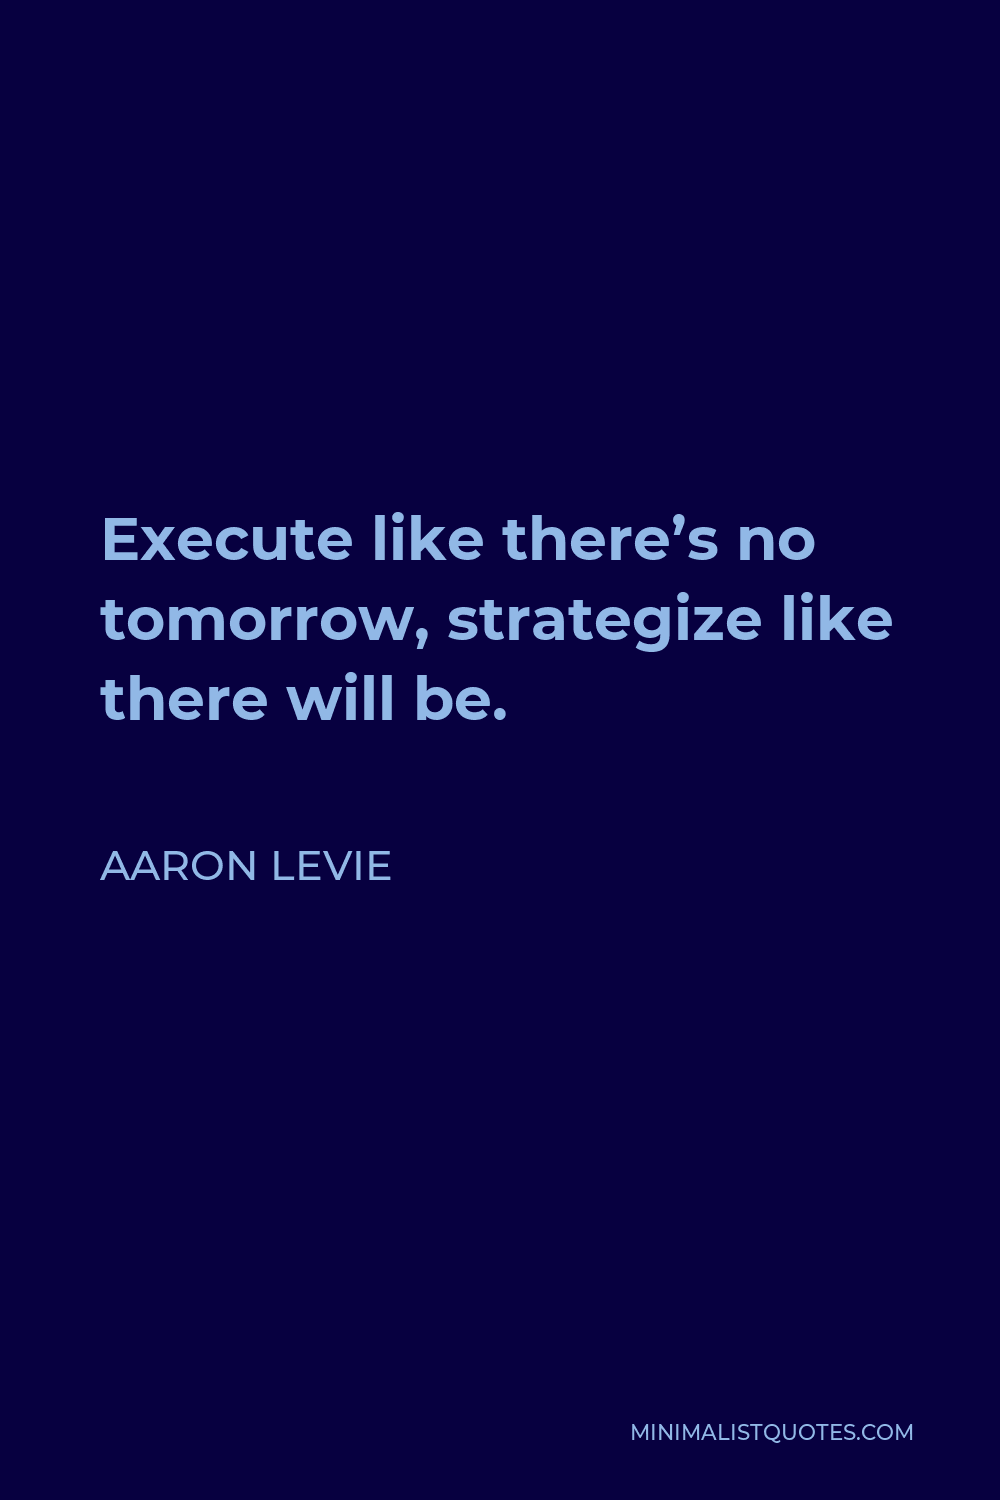 Aaron Levie Quote - Execute like there’s no tomorrow, strategize like there will be.